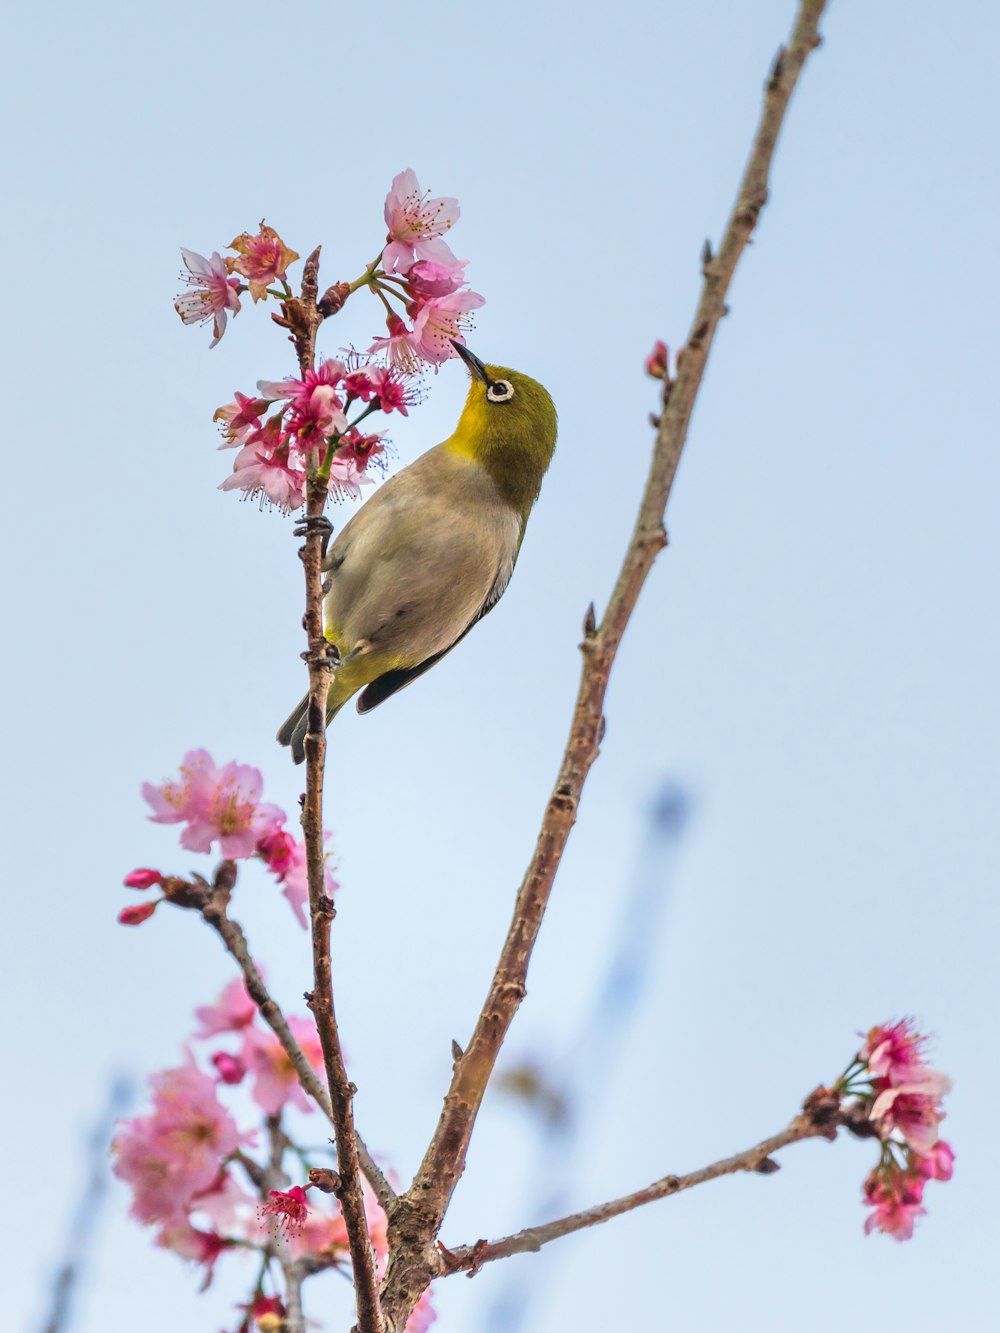 a bird perched on a branch with pink flowers